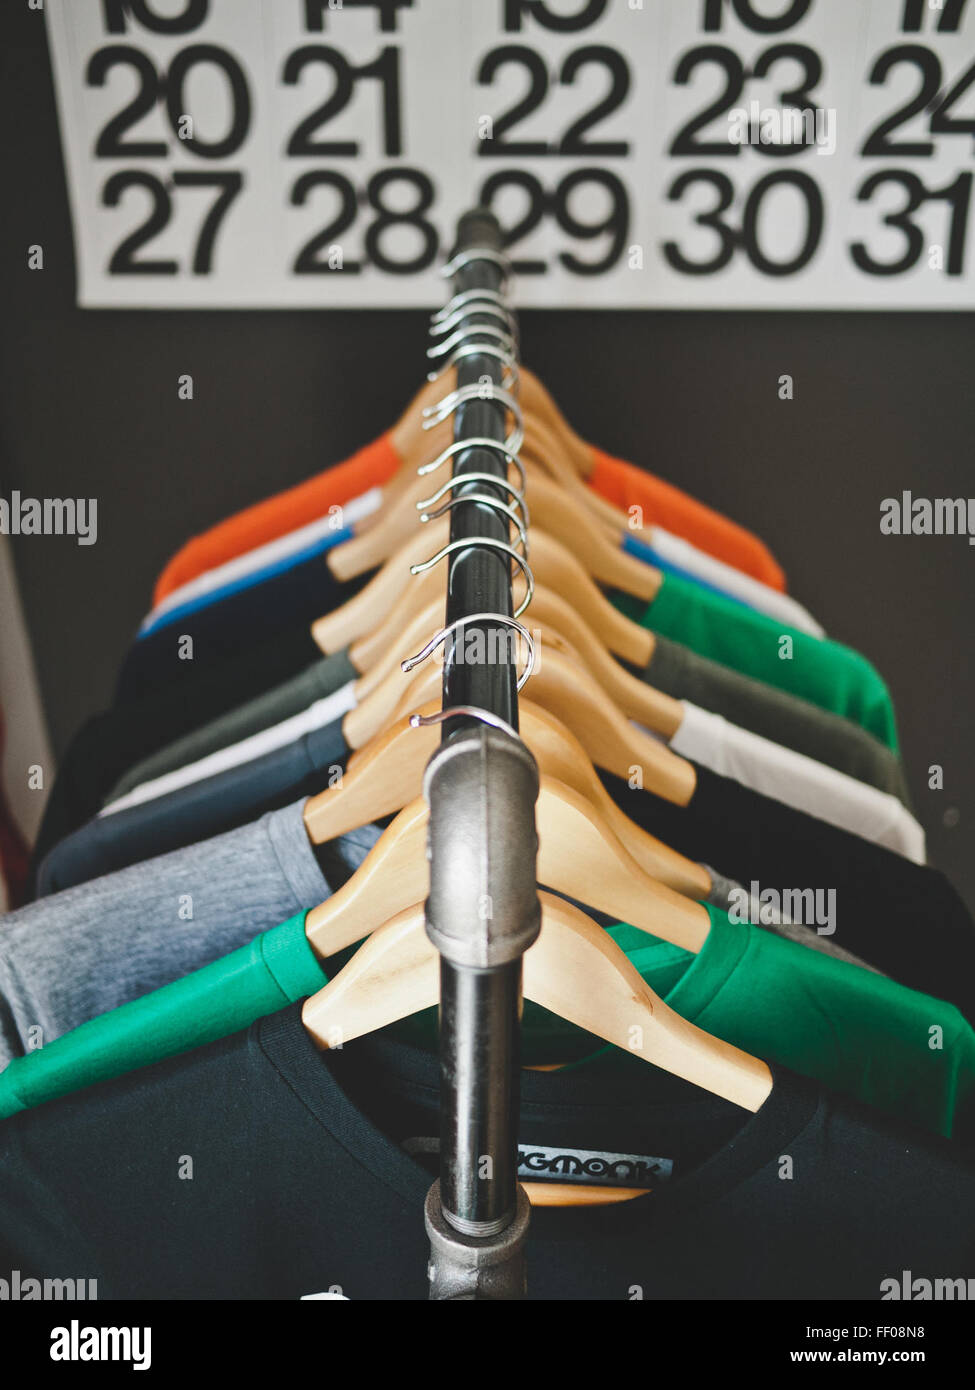 Shirts Hanging on Clothes Rack Shirts Hanging on Clothes Rack Stock Photo